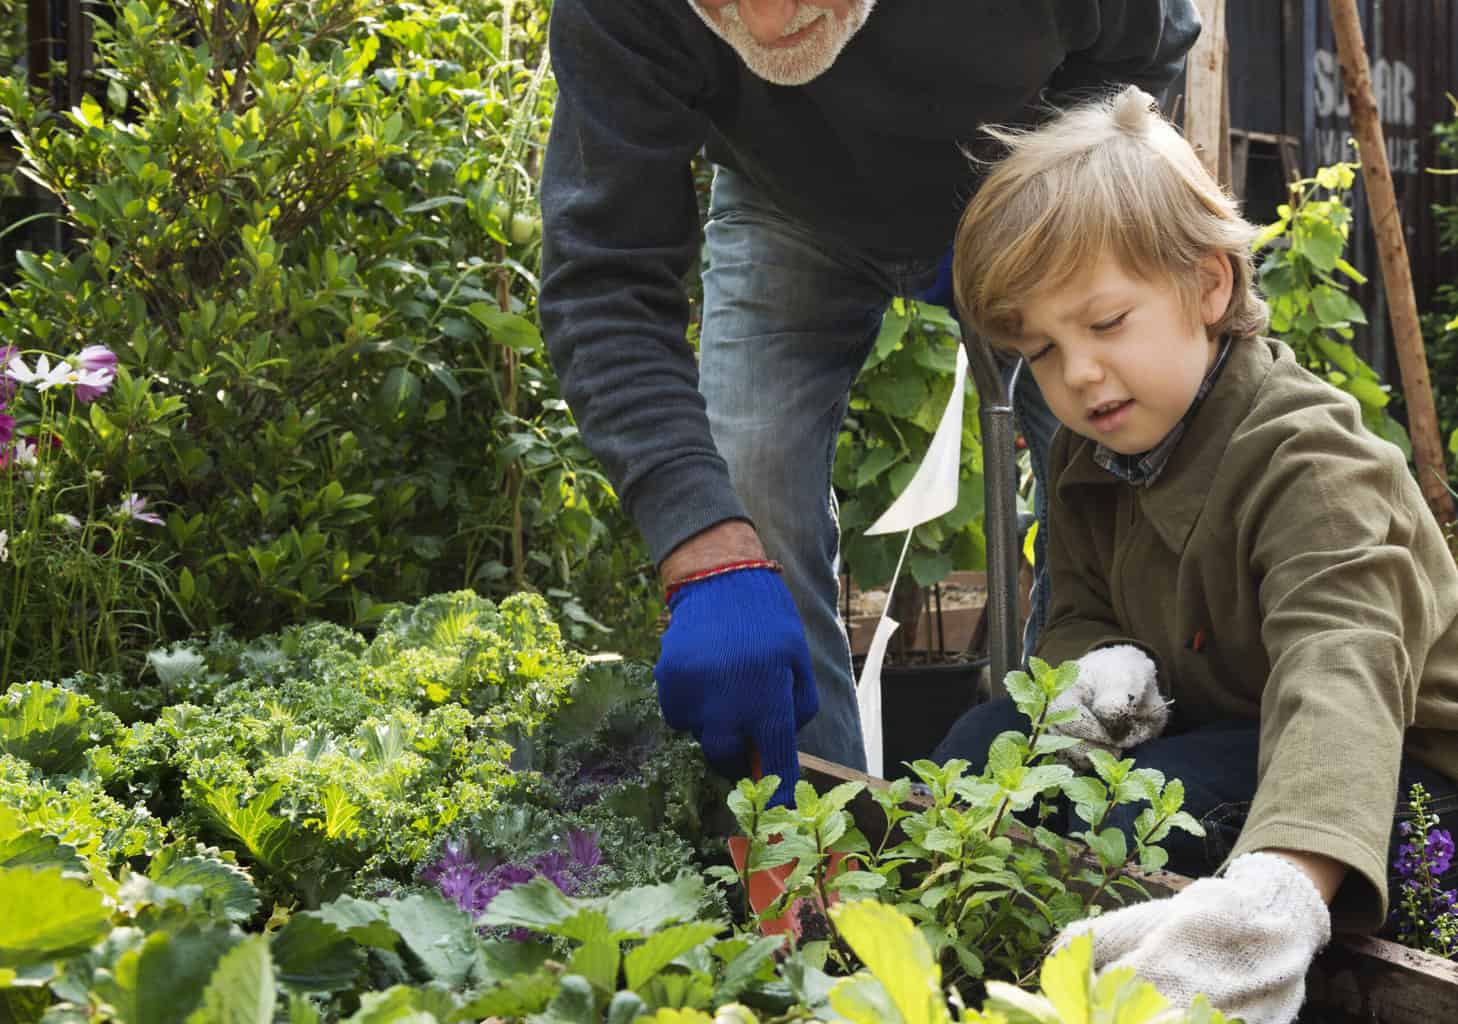 gardening with kids, a grandfather planting a garden with young grandson